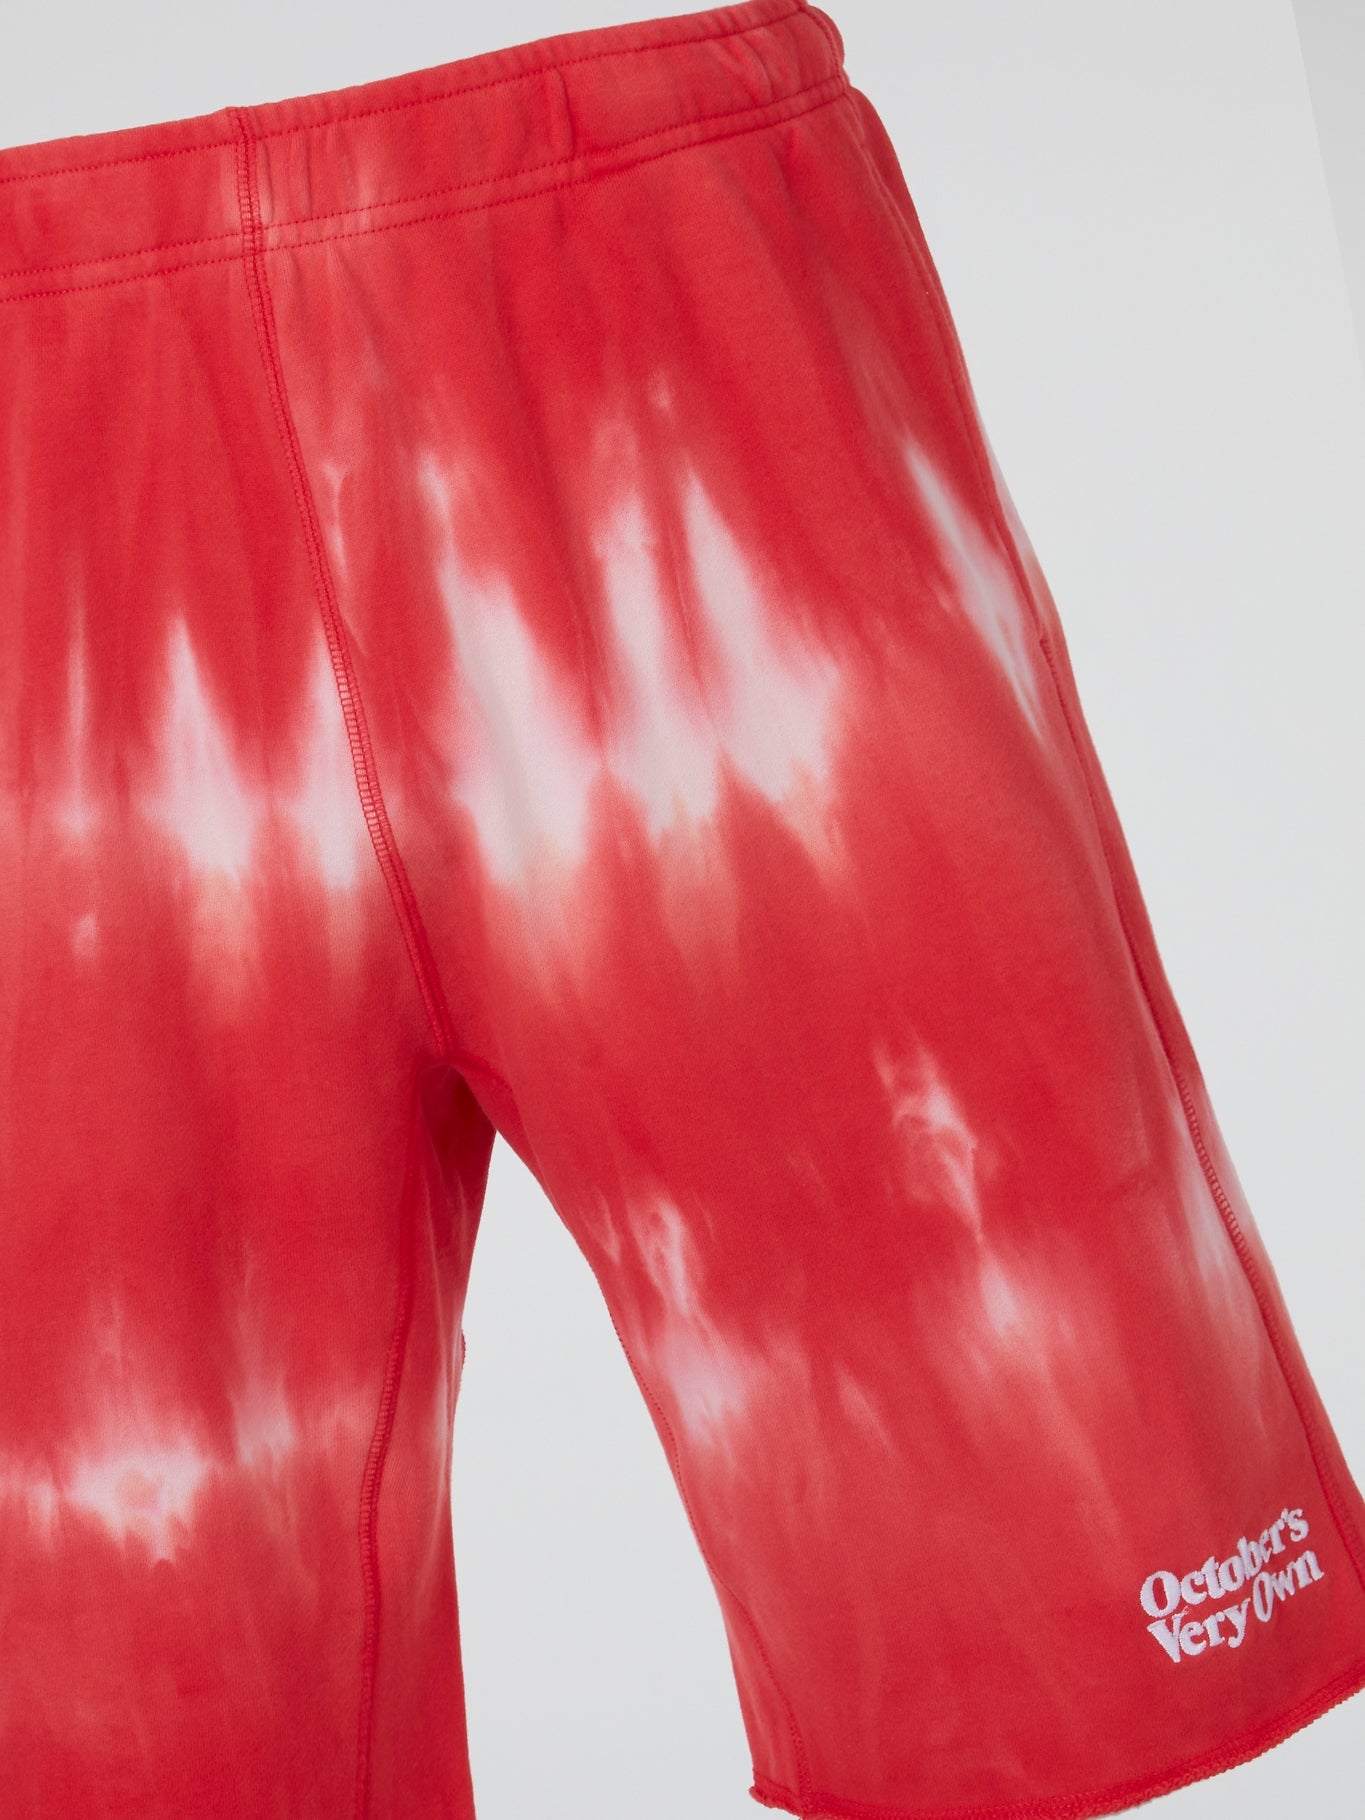 Red Marble Tie Dye Shorts